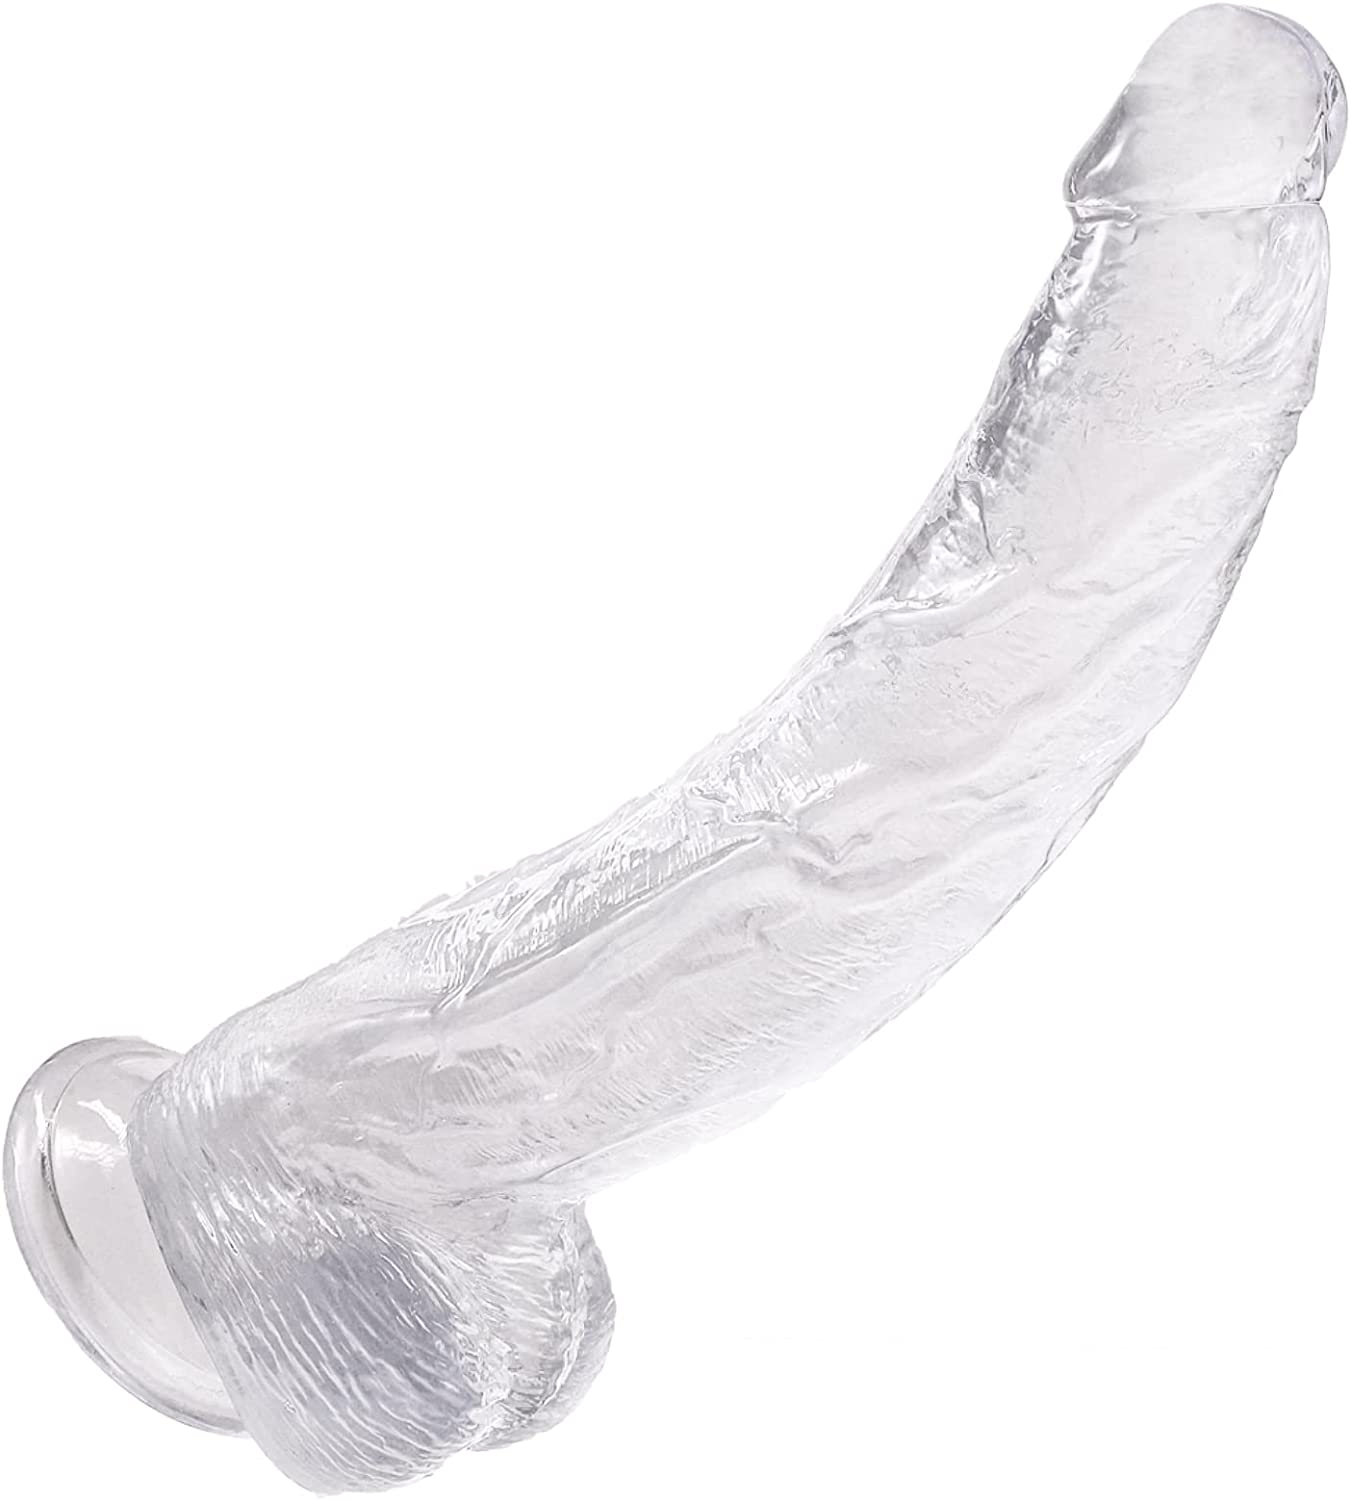 dawn gravely recommends 12 Inch Glass Dildo